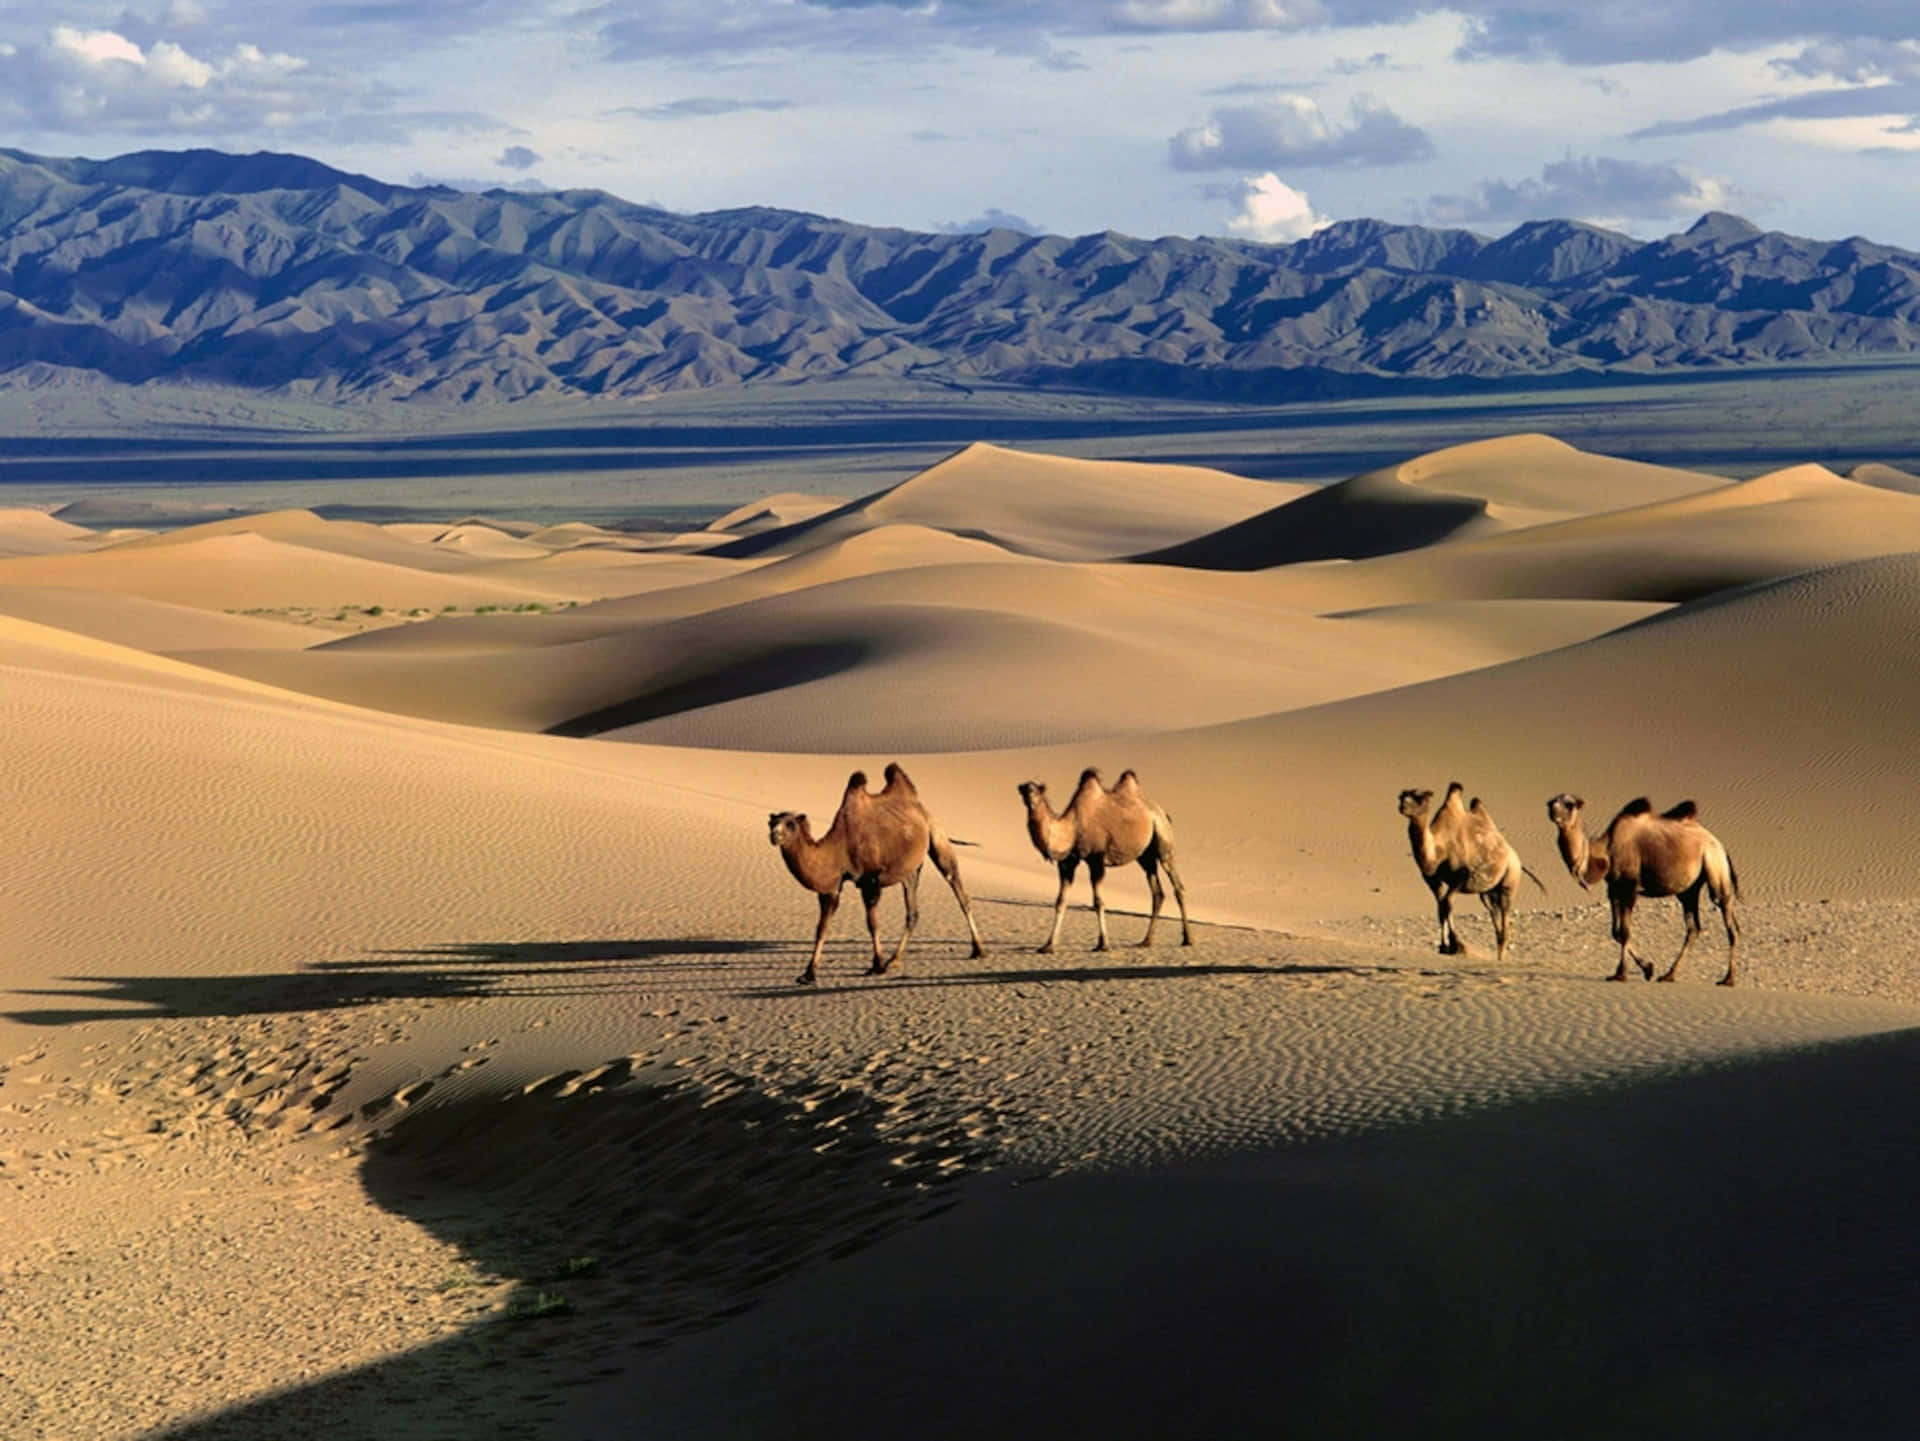 A stunning view of the stunning Mongolian landscape